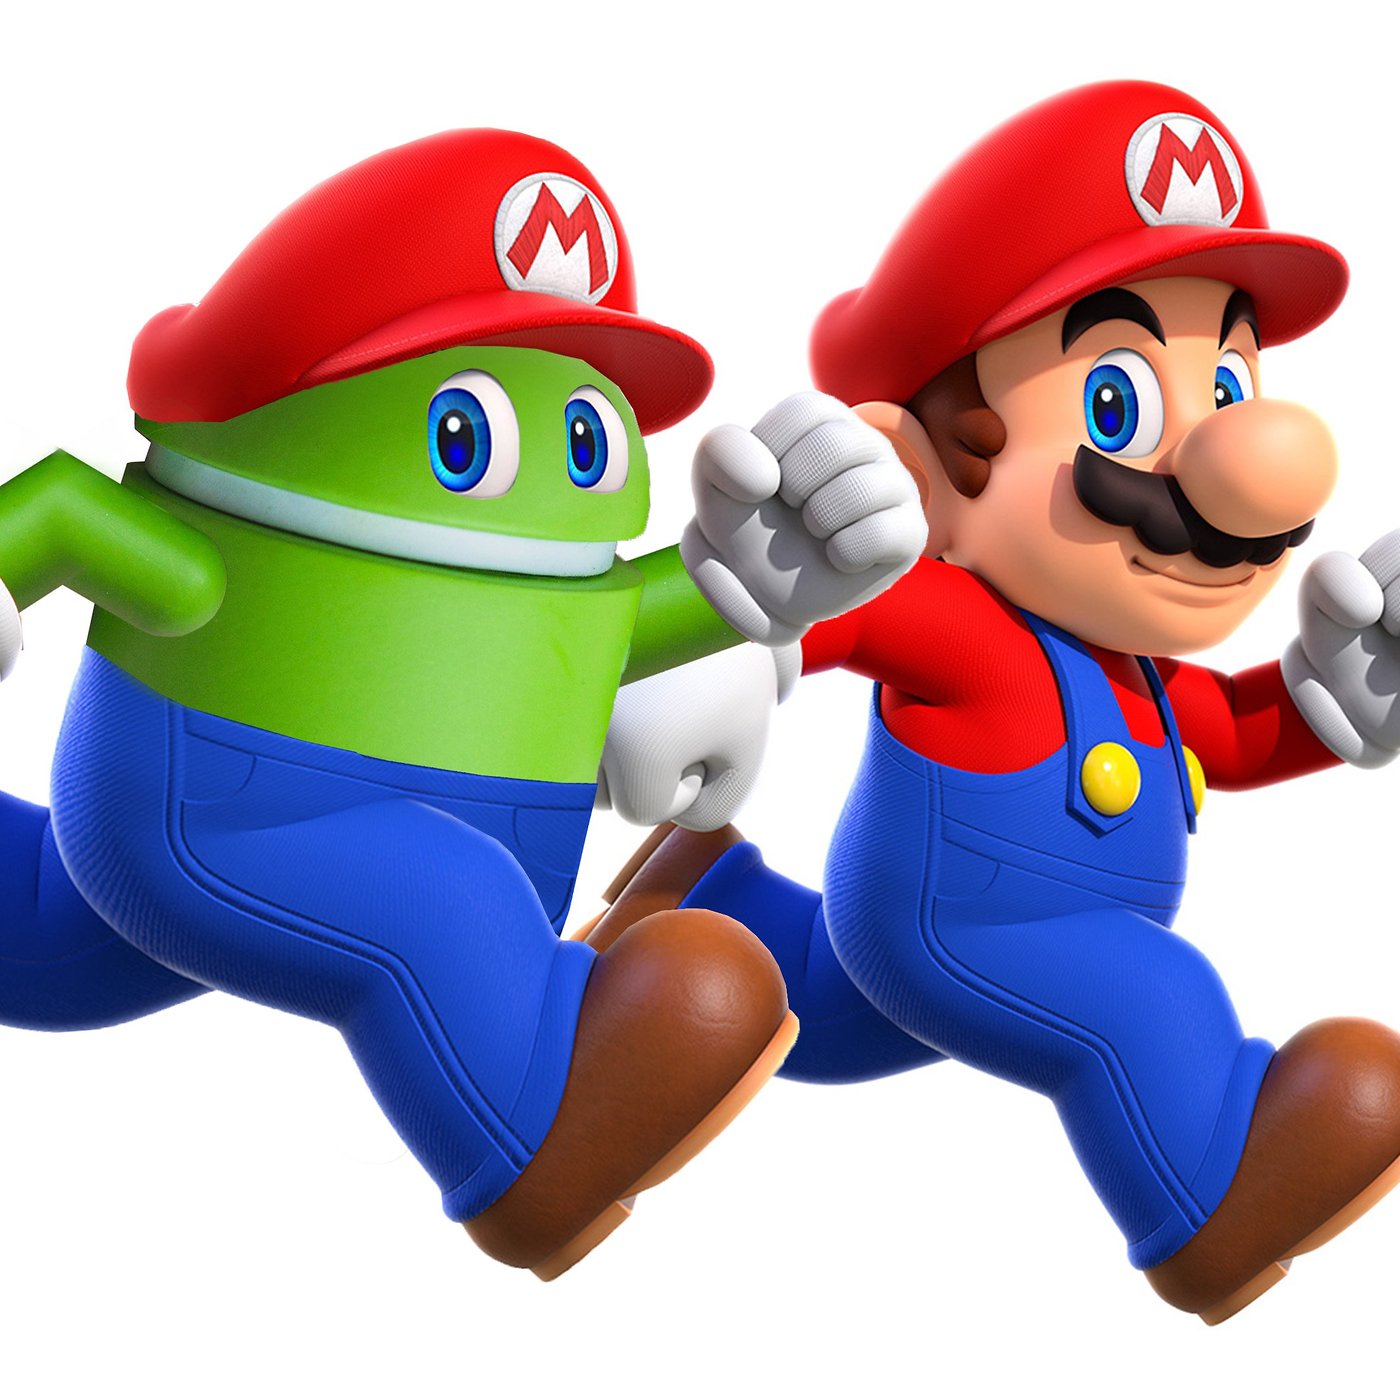 Super Mario Run finally launched on Android | NextPit